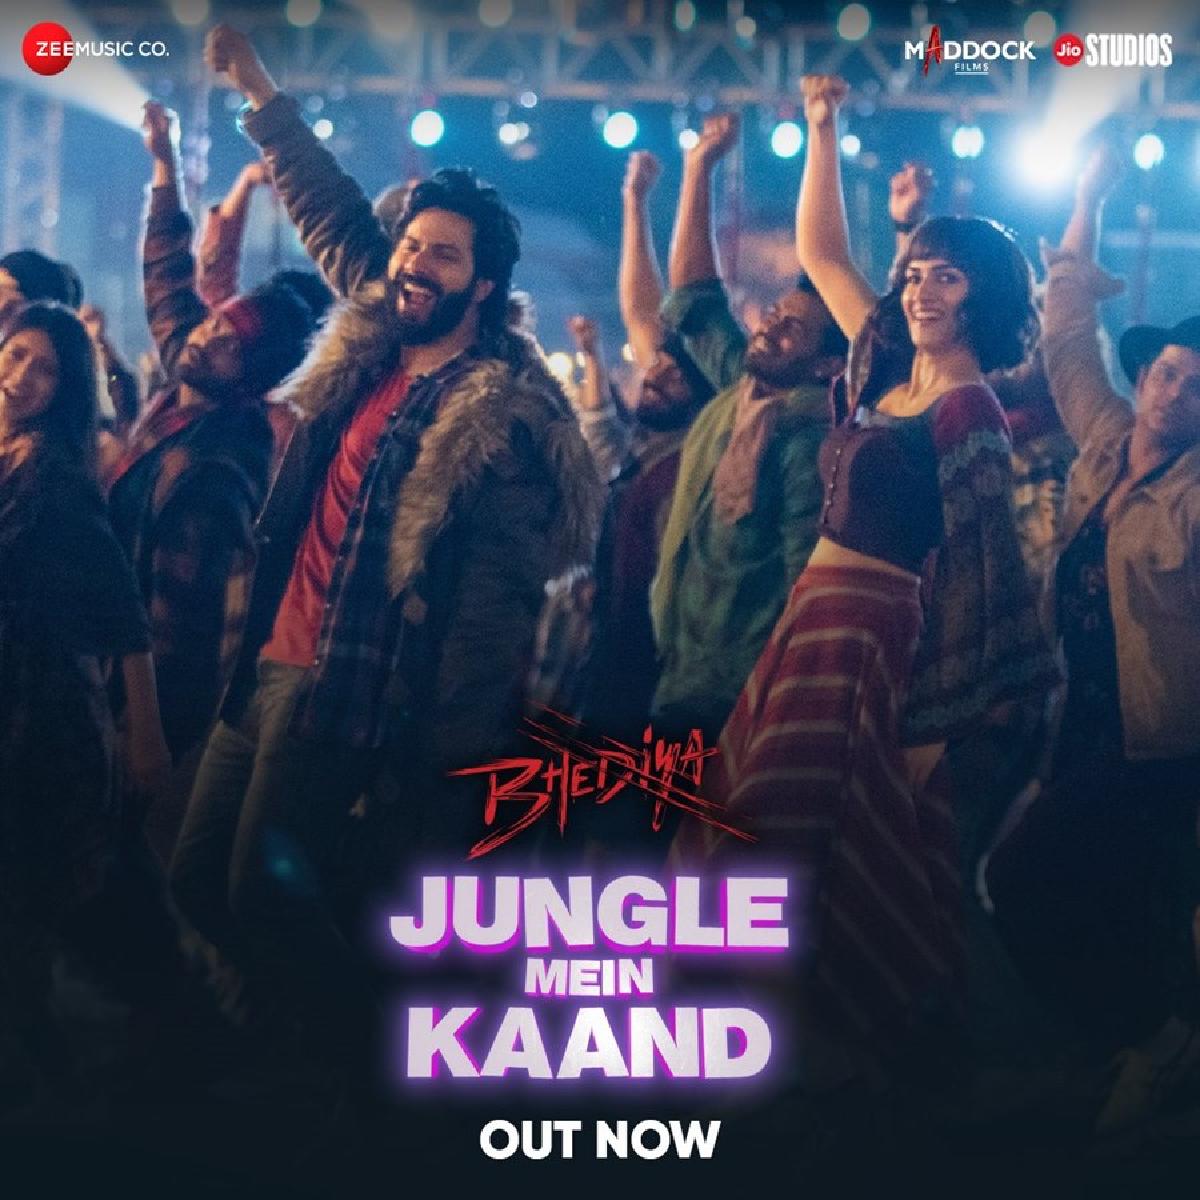 Get Groovy With Jungle Mein Kand From Bhediya, Song Out Now